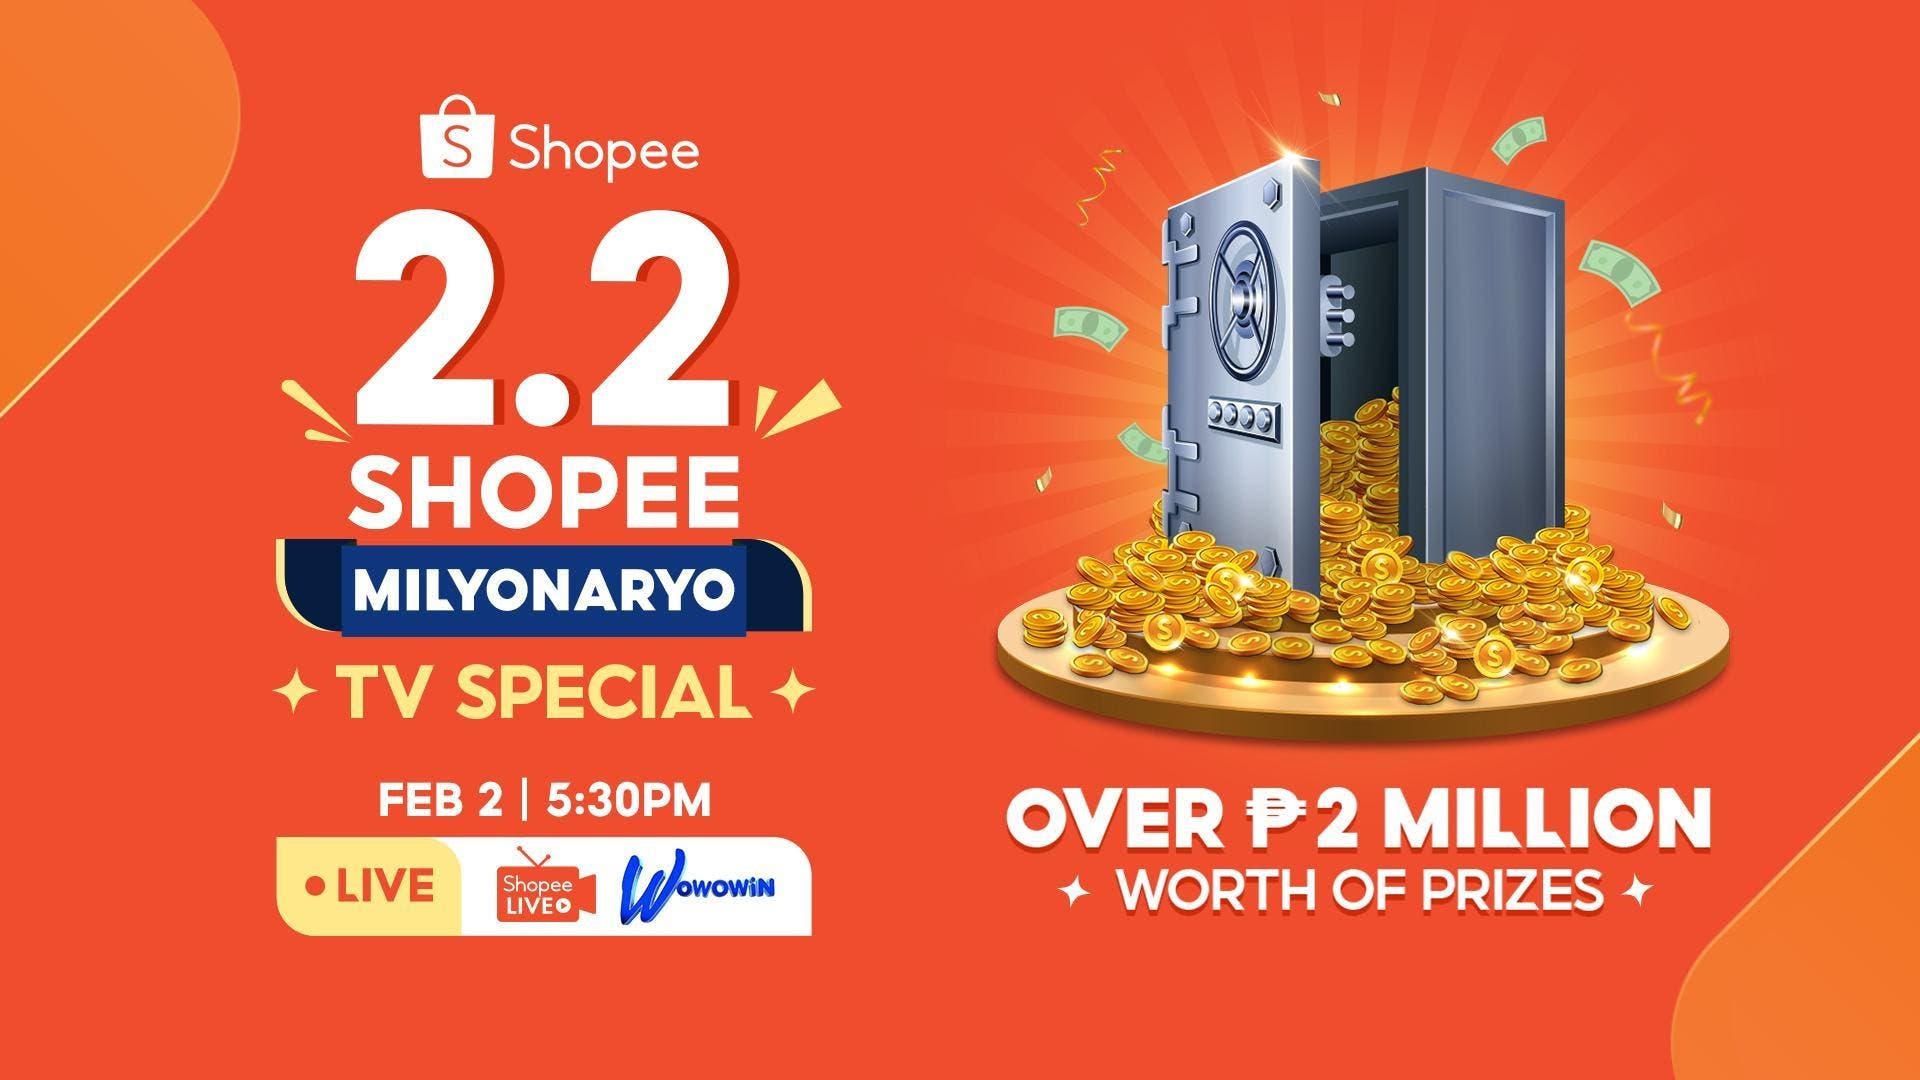 Shopee to Give Away P2M Worth of Prizes During the 2.2 Shopee